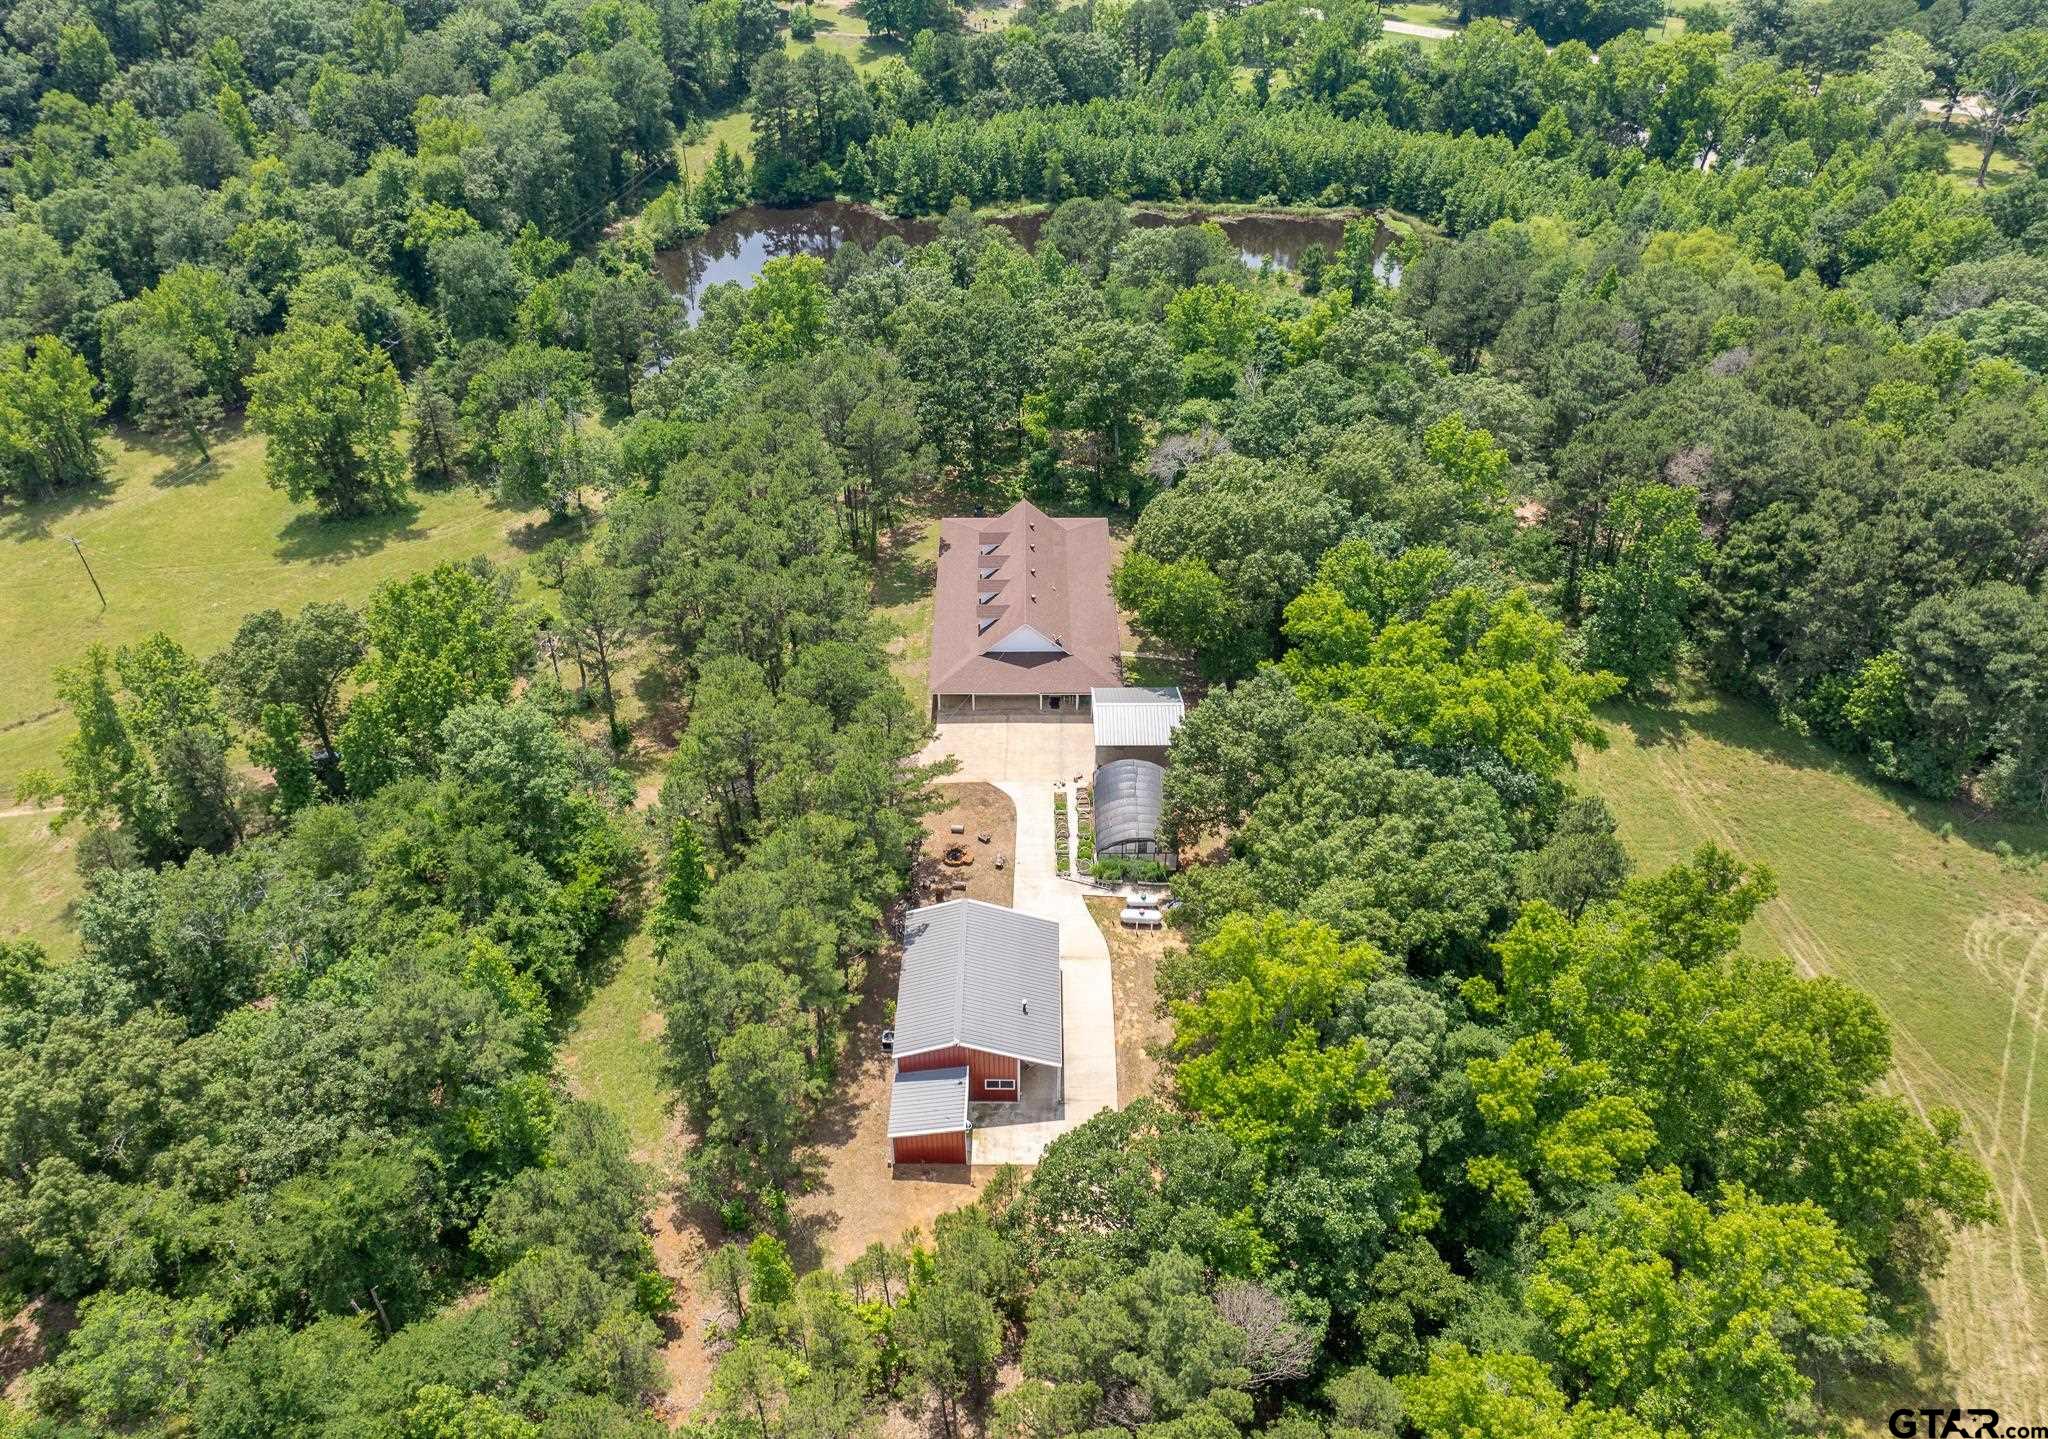 an aerial view of a house with a yard and trees in the background